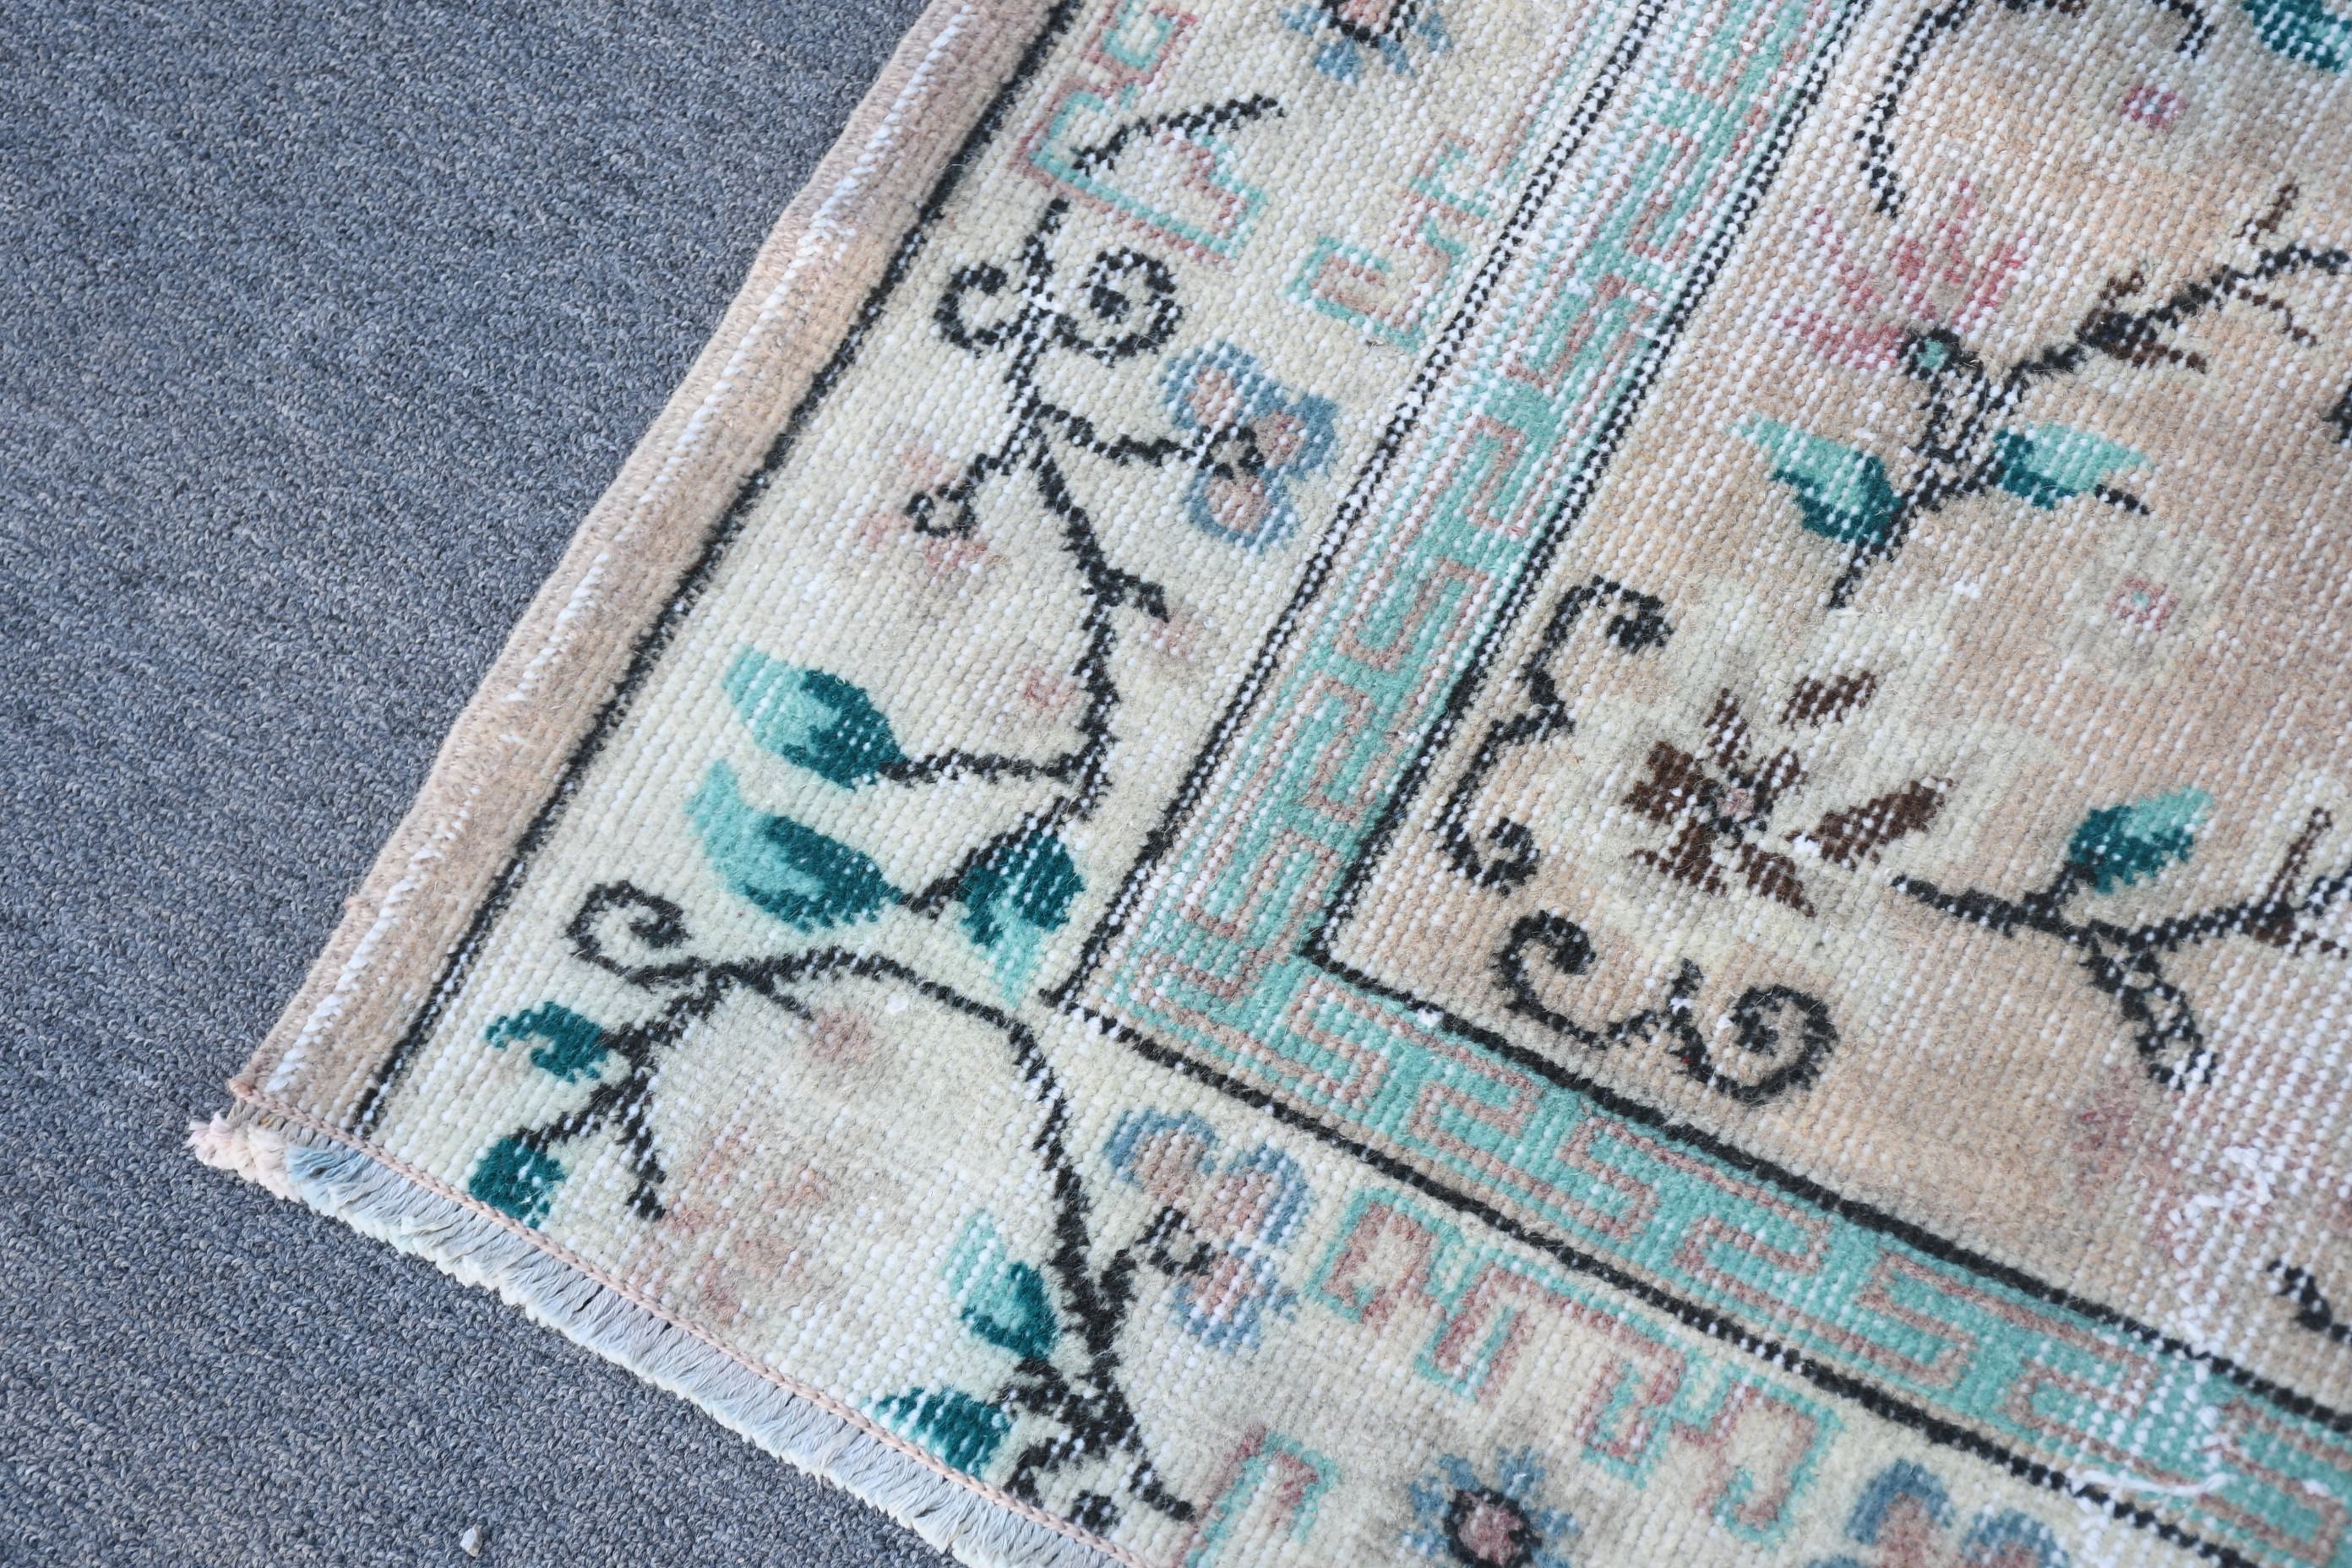 Home Decor Rugs, Vintage Rugs, Turkish Rug, Rugs for Kitchen, Oushak Rug, 3.8x6.7 ft Area Rug, Green Cool Rugs, Indoor Rugs, Bedroom Rugs